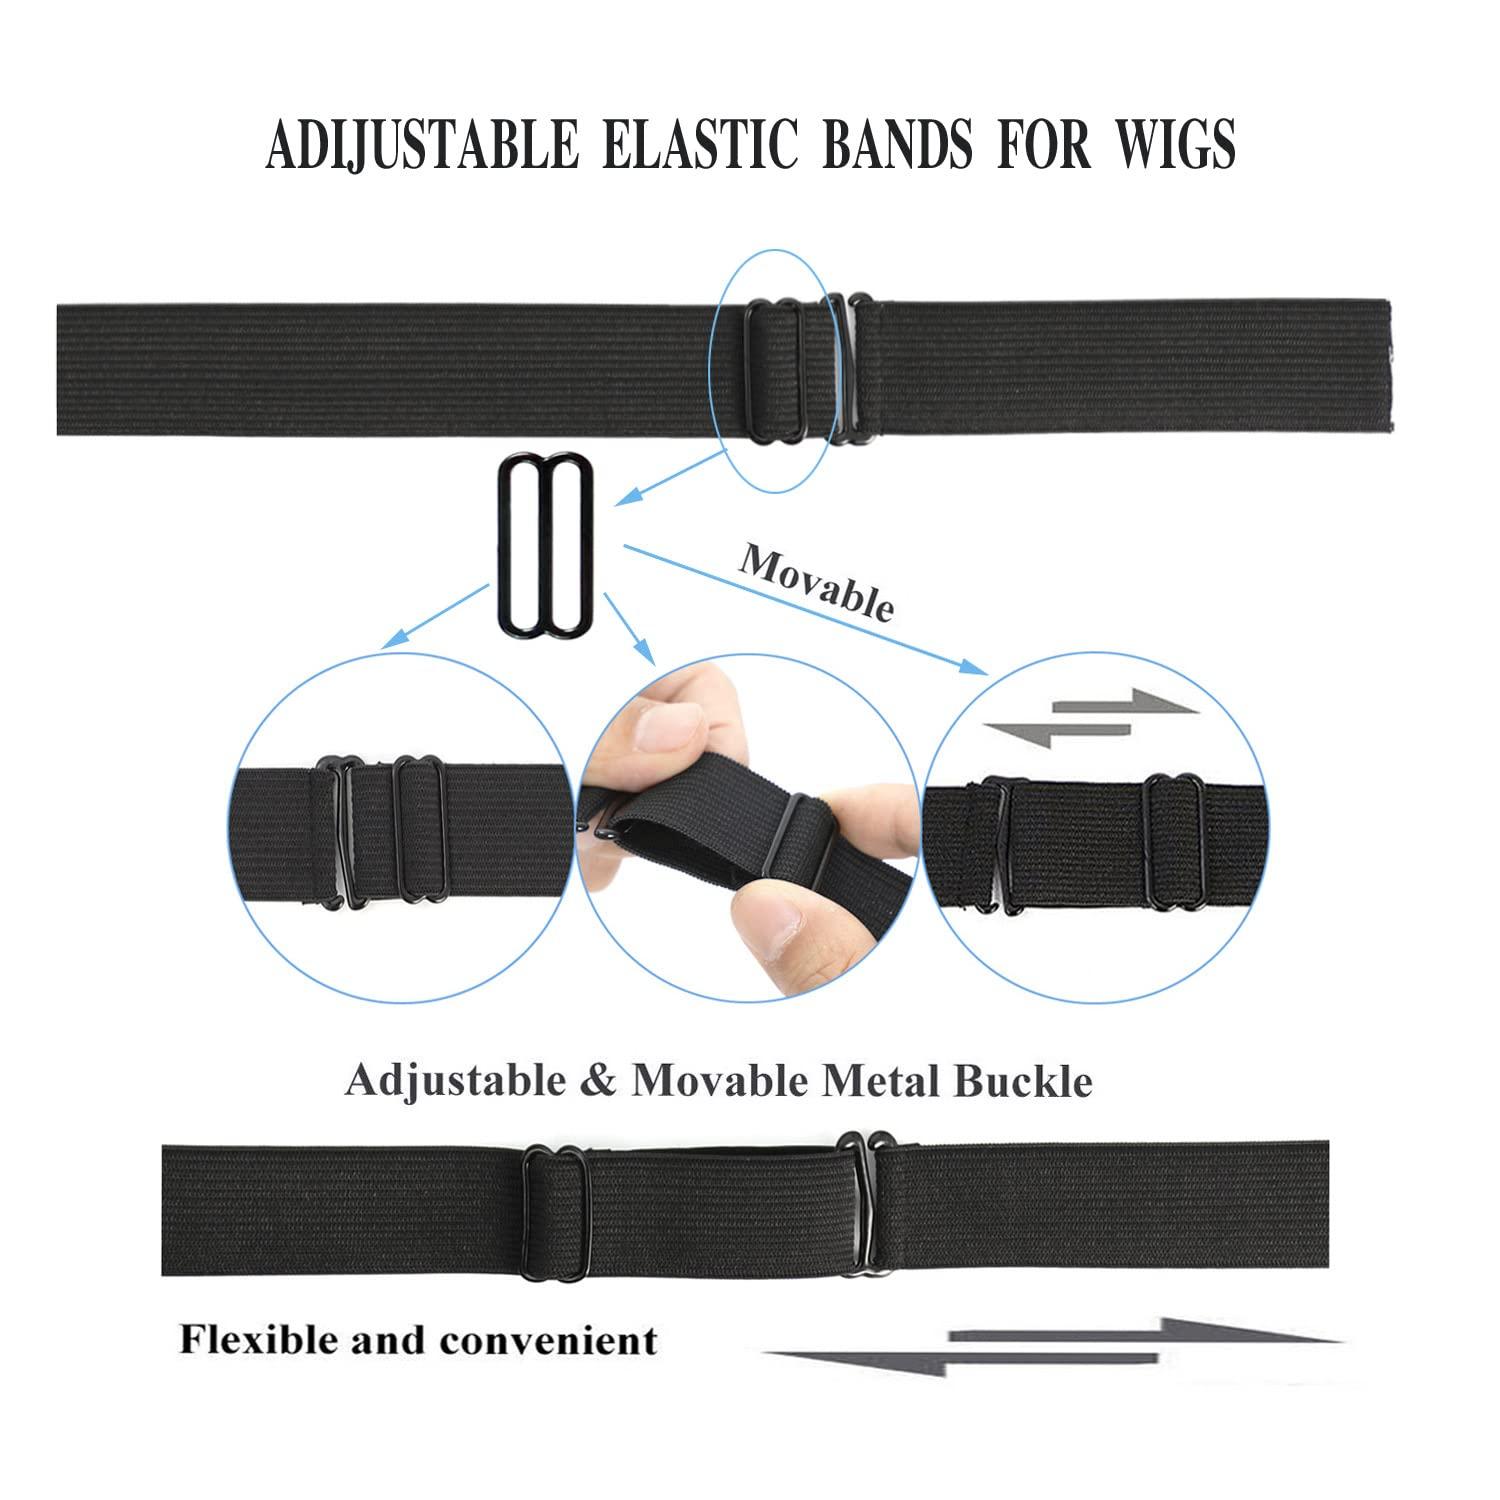  MYKURS 8 PCS Adjustable Wig Elastic Bands with hook, Elastic  Wig Straps for Making Wigs, Sewing Elastic Bands for Keeping Wigs in Place  : Arts, Crafts & Sewing